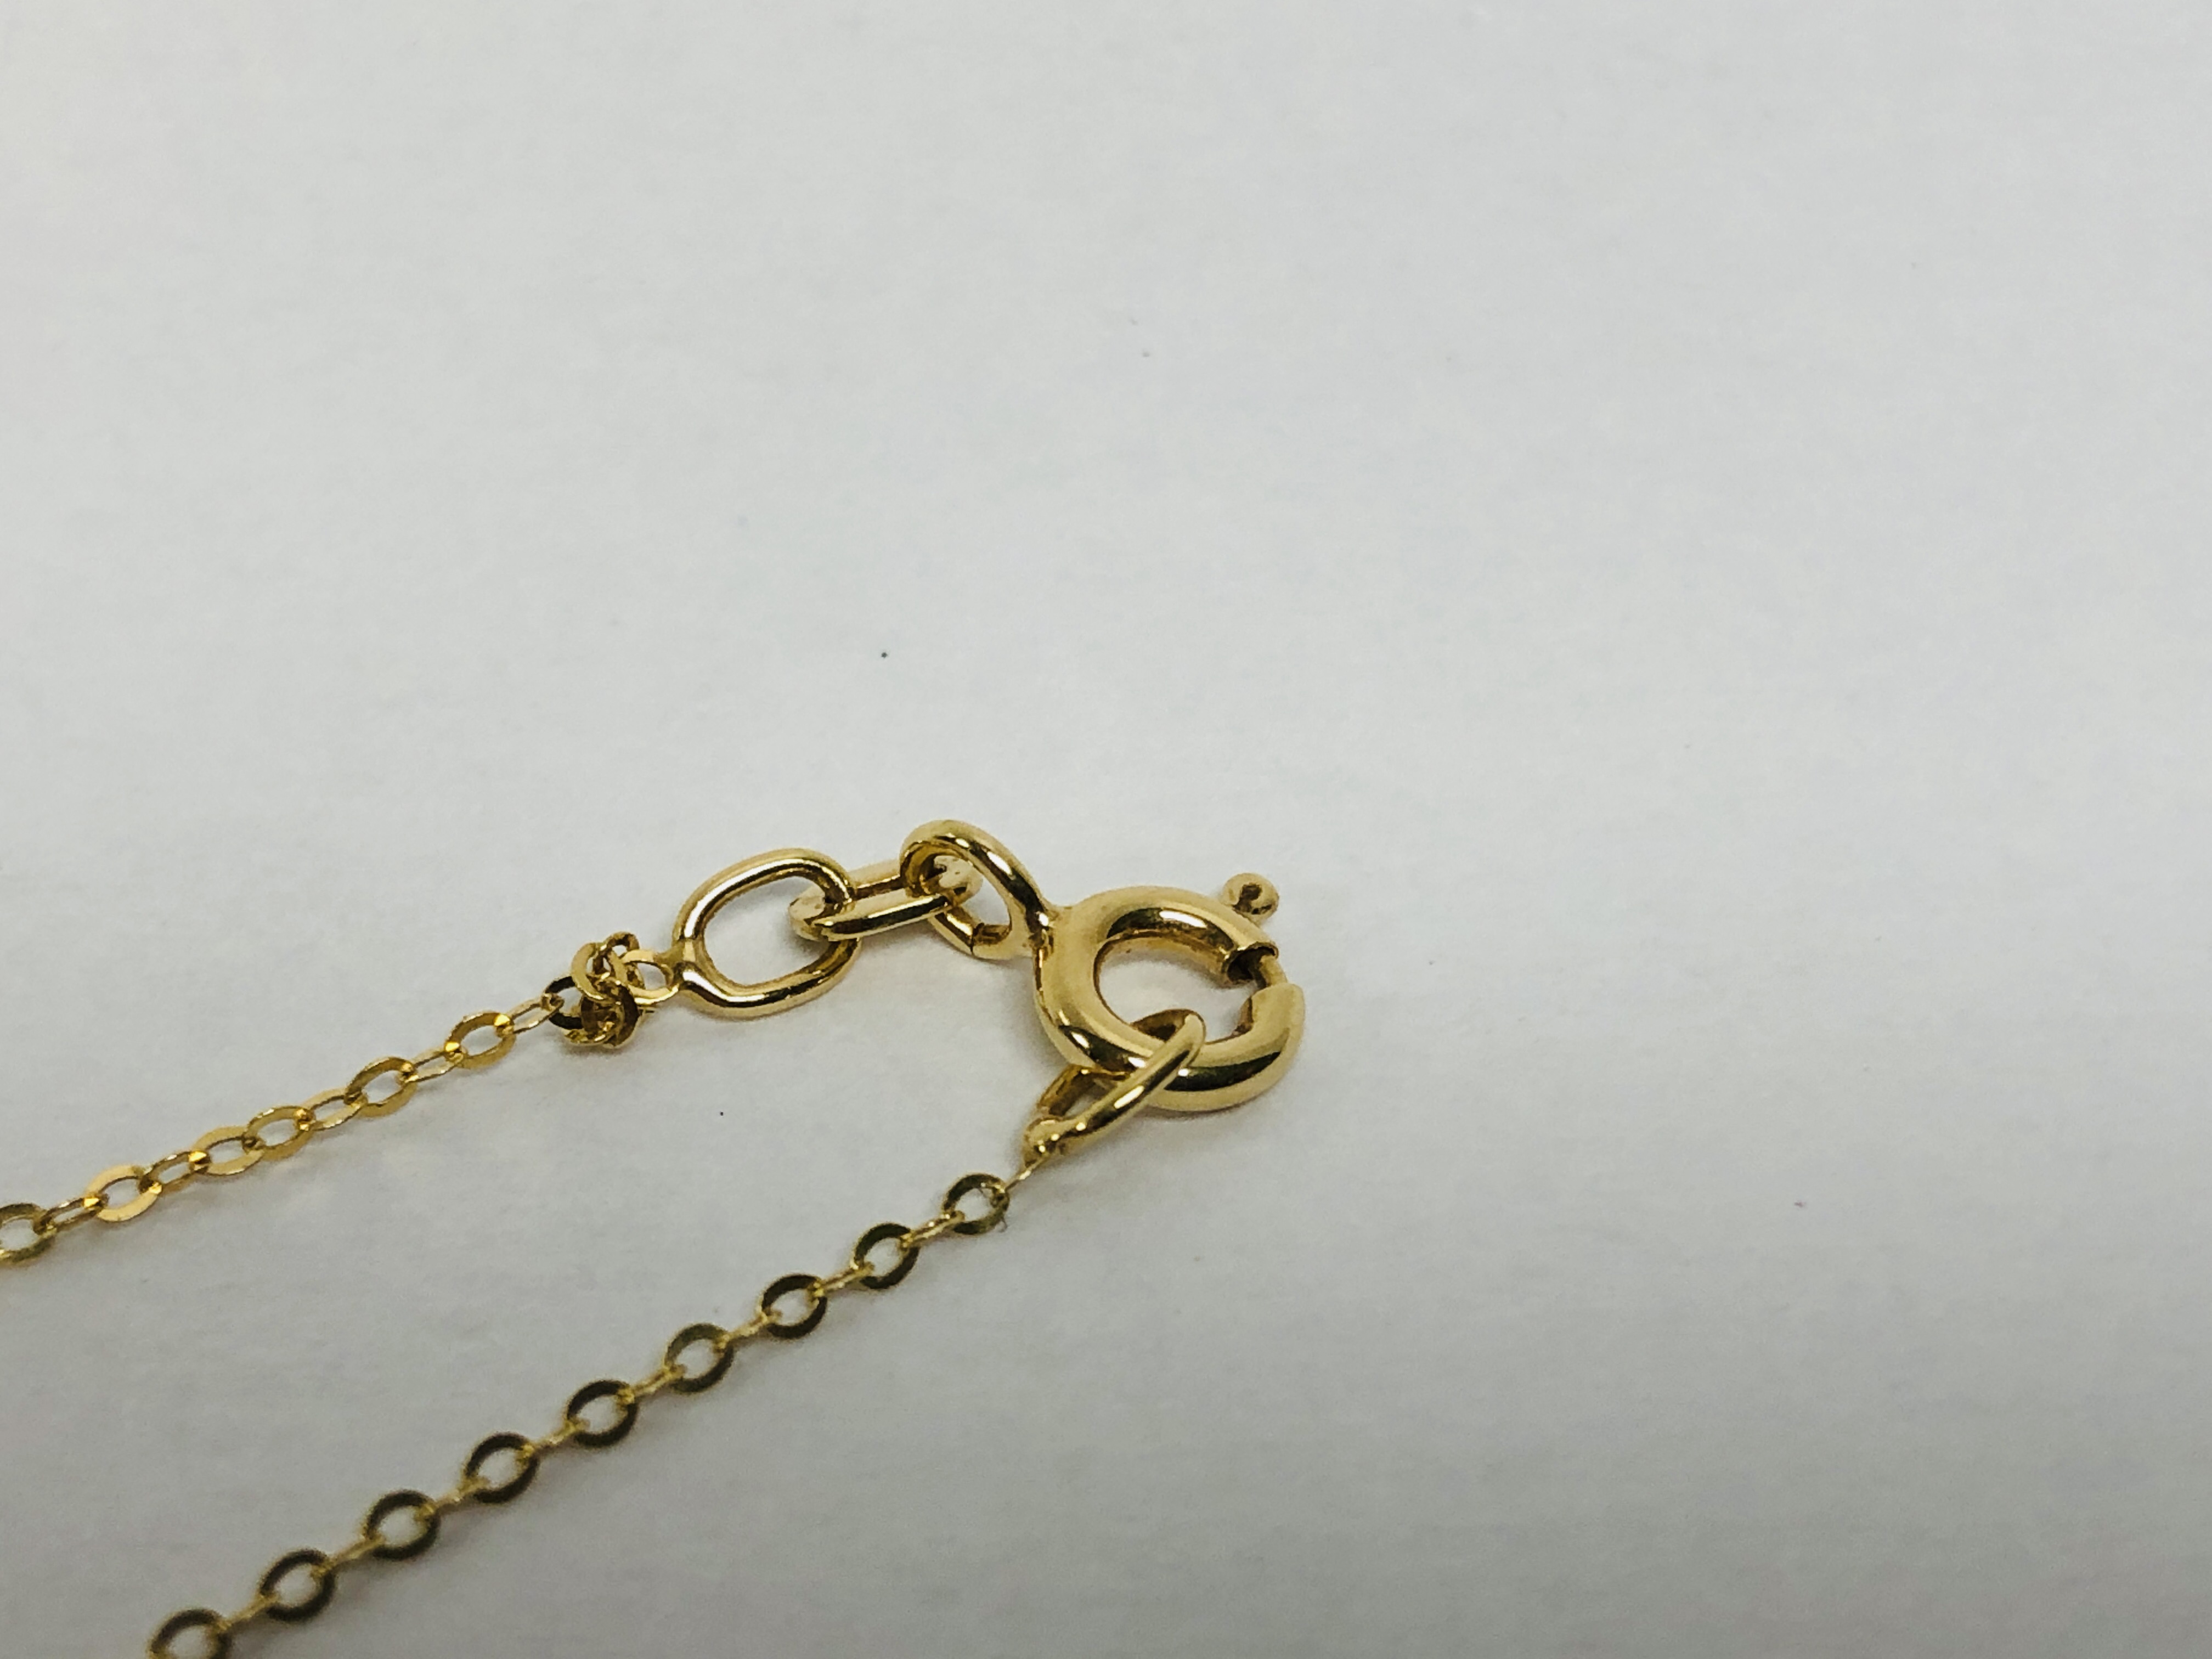 FINE DESIGNER NECKLACE MARKED 585 WITH TWO HOOP DROPS - Image 3 of 6